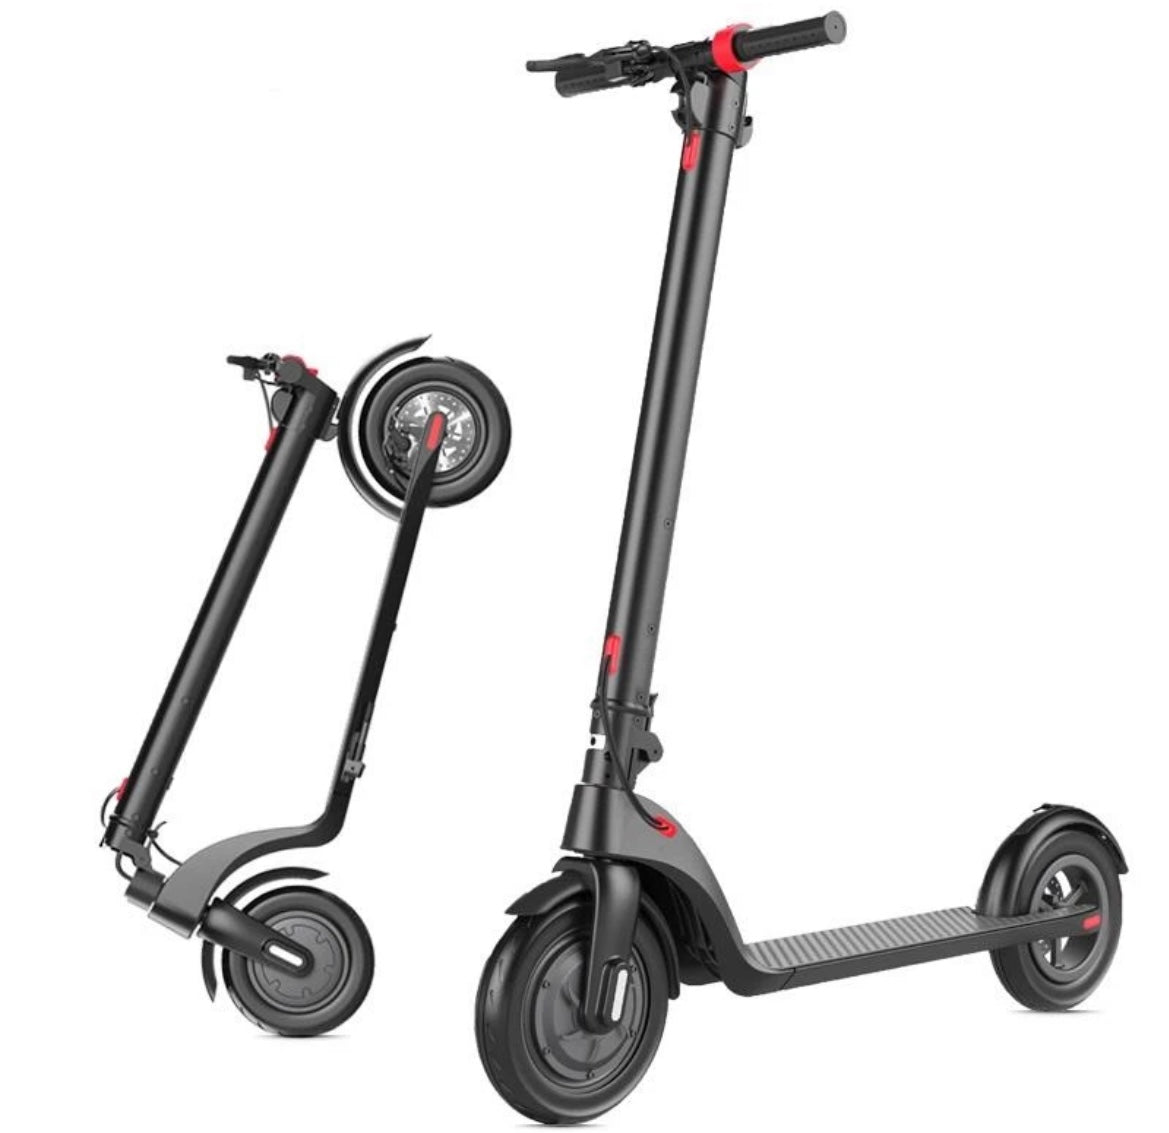 X7 E-scooter 350w is